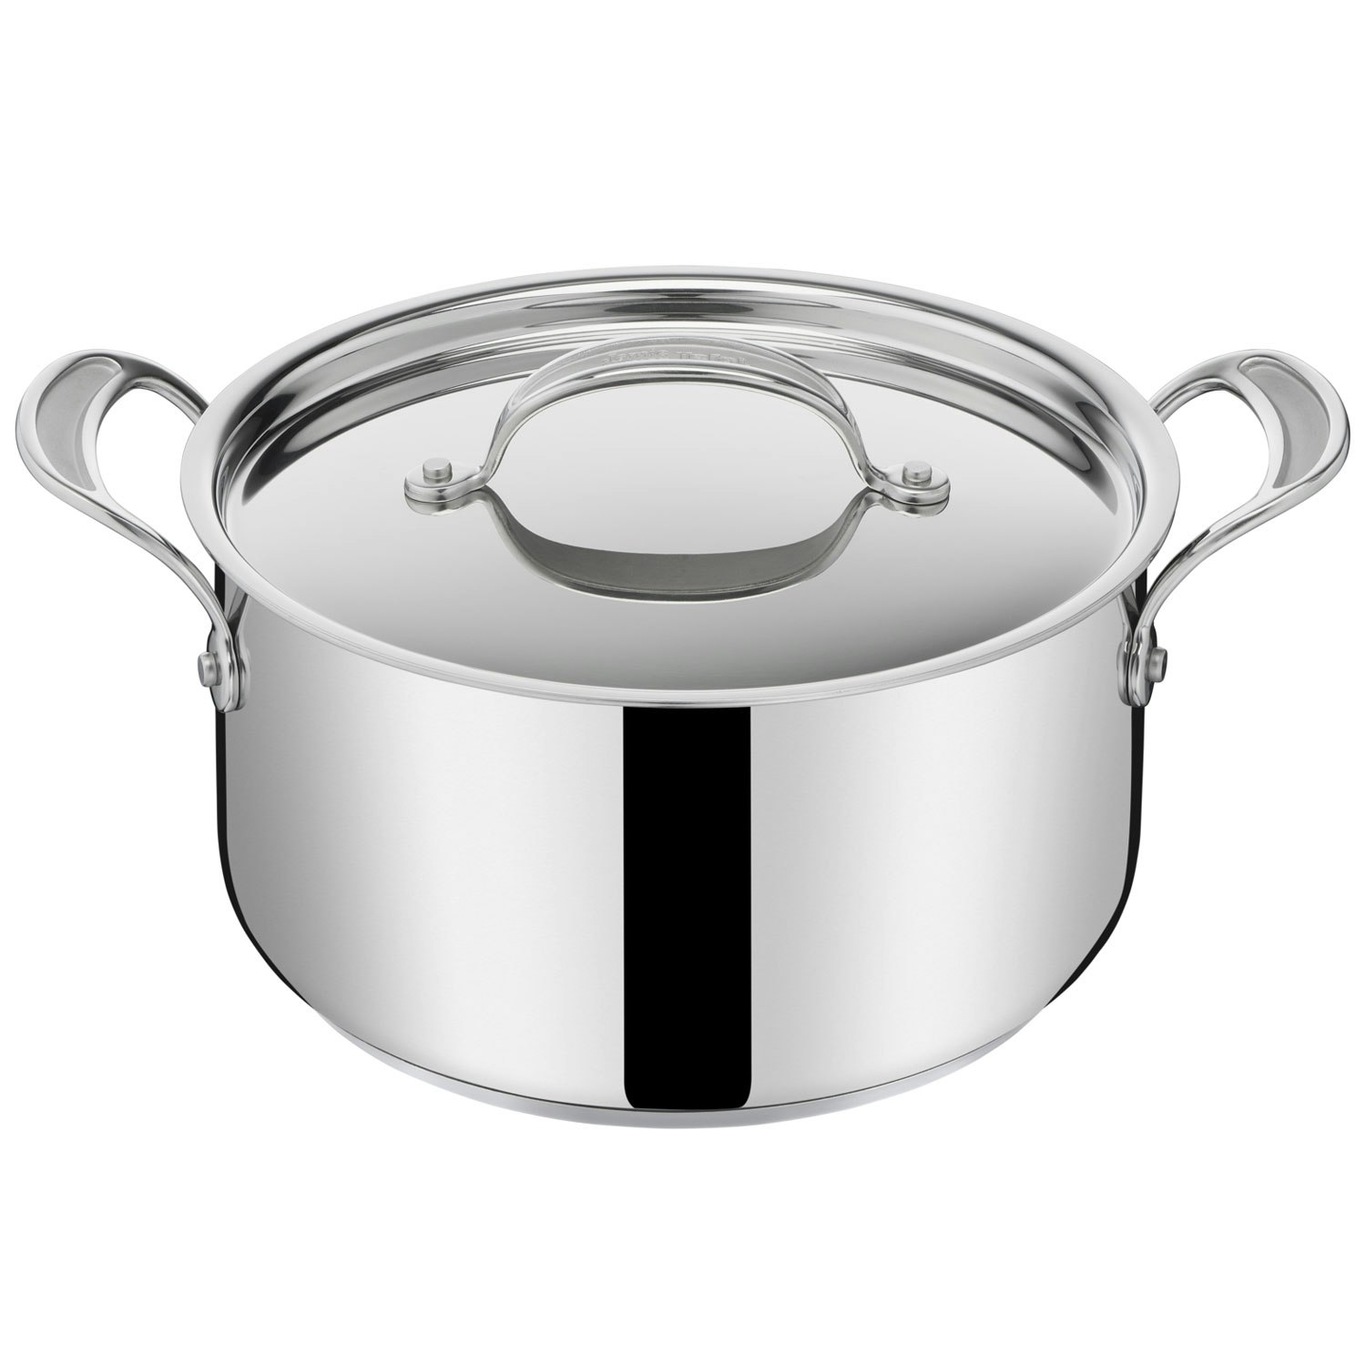 https://royaldesign.com/image/2/tefal-jamie-oliver-cooks-classic-pot-stainless-steel-0?w=800&quality=80